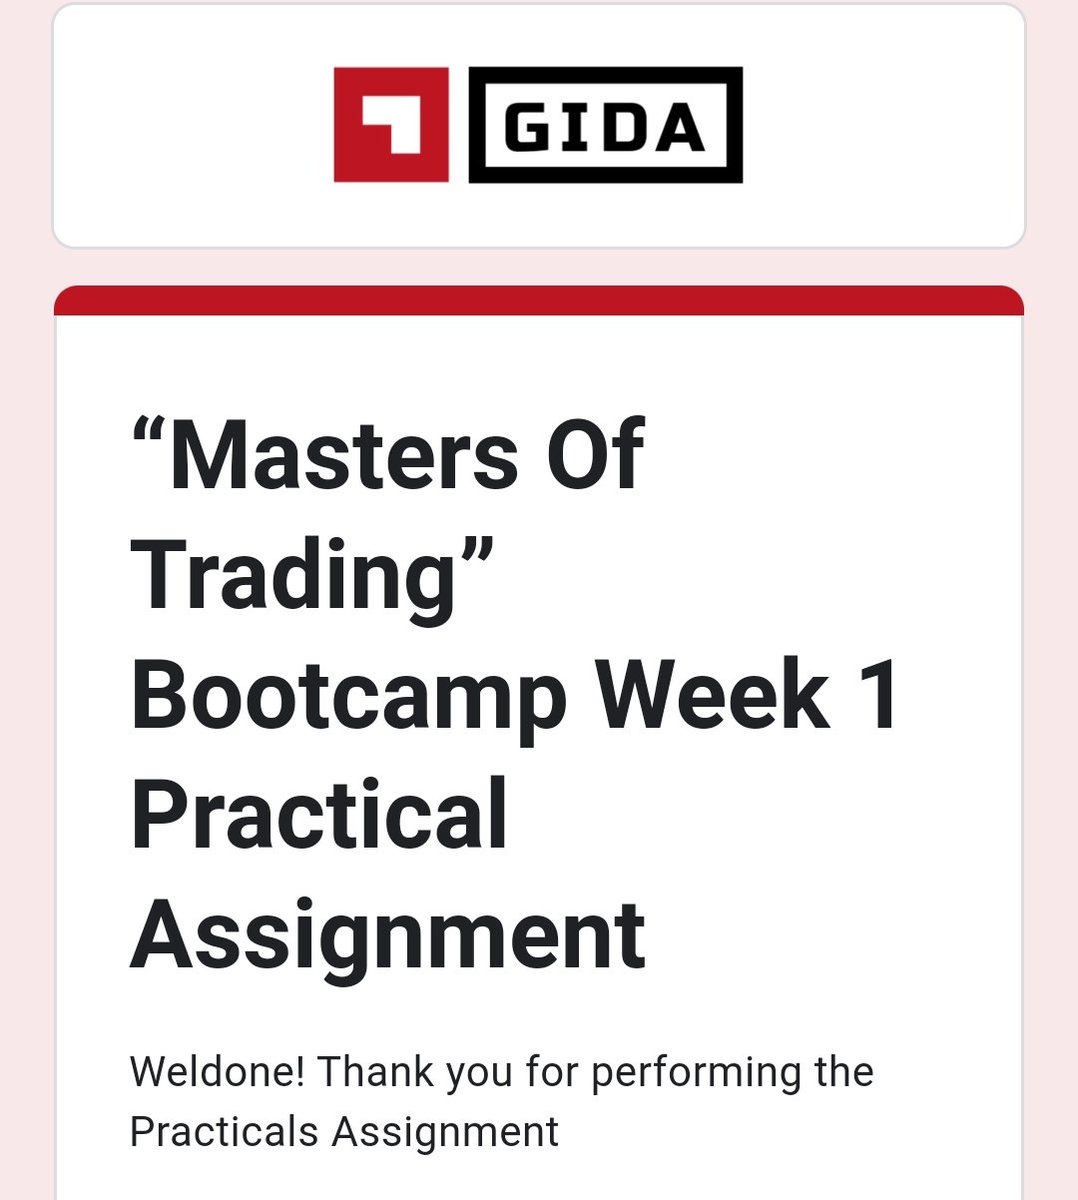 Just submitted my first MOT boot camp assignment. Opportunity made possible by @Official_GIDA @kevin_chibuoyim #MastersOfTrading #MOTBootcamp #GIDAMOT #GIDA